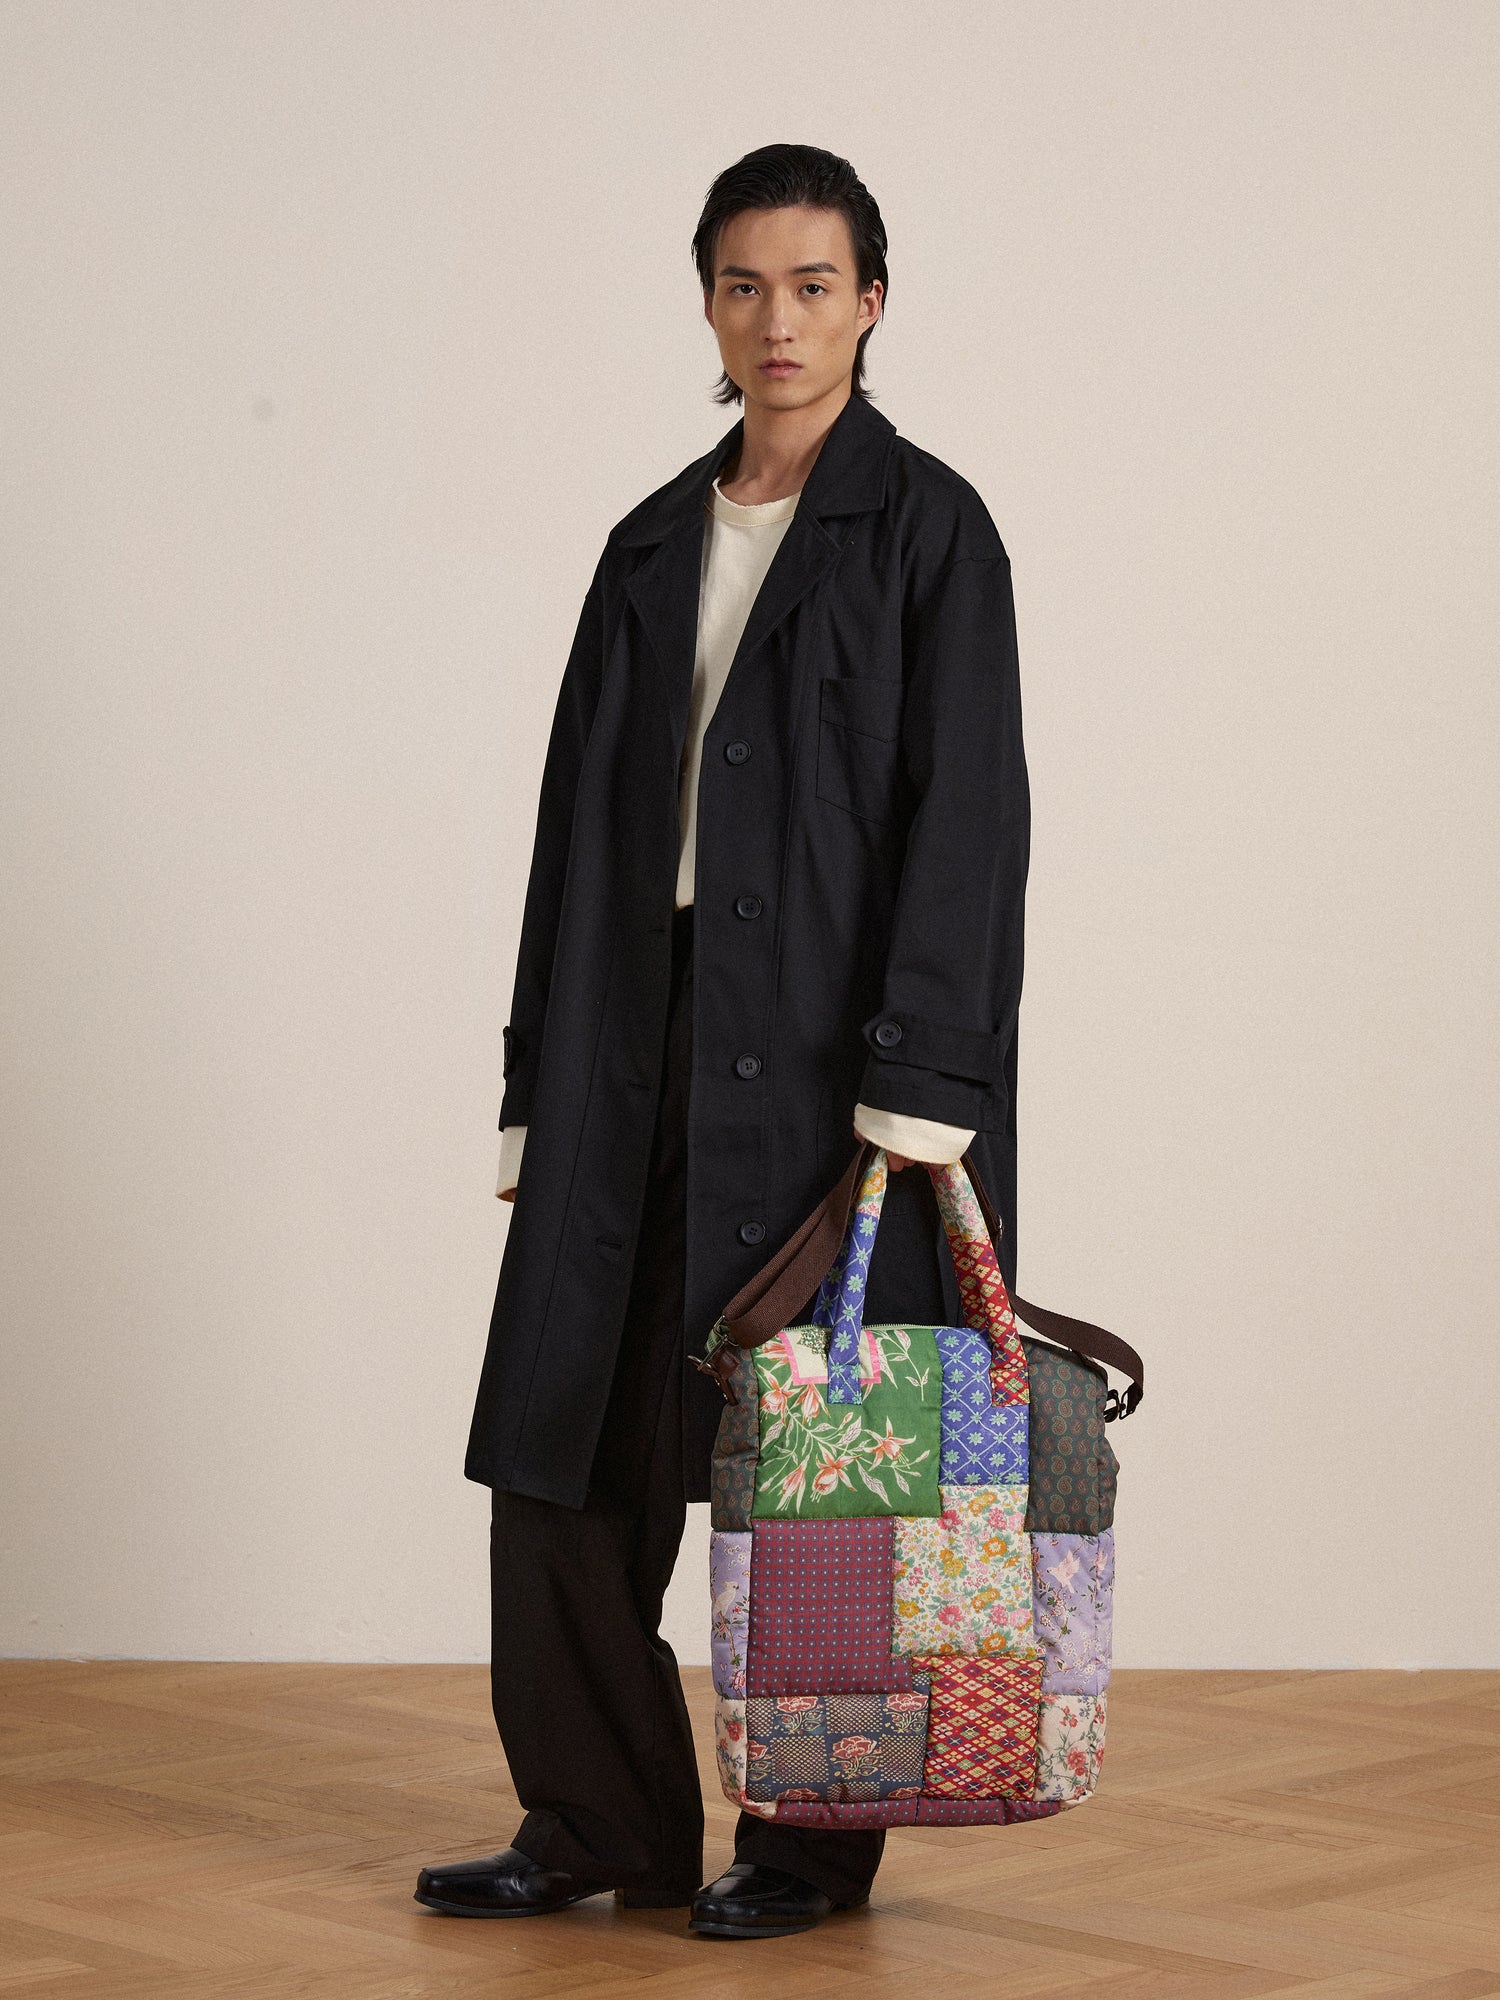 A man in a trench coat holding a Profound Gardenia Tapestry Bag.